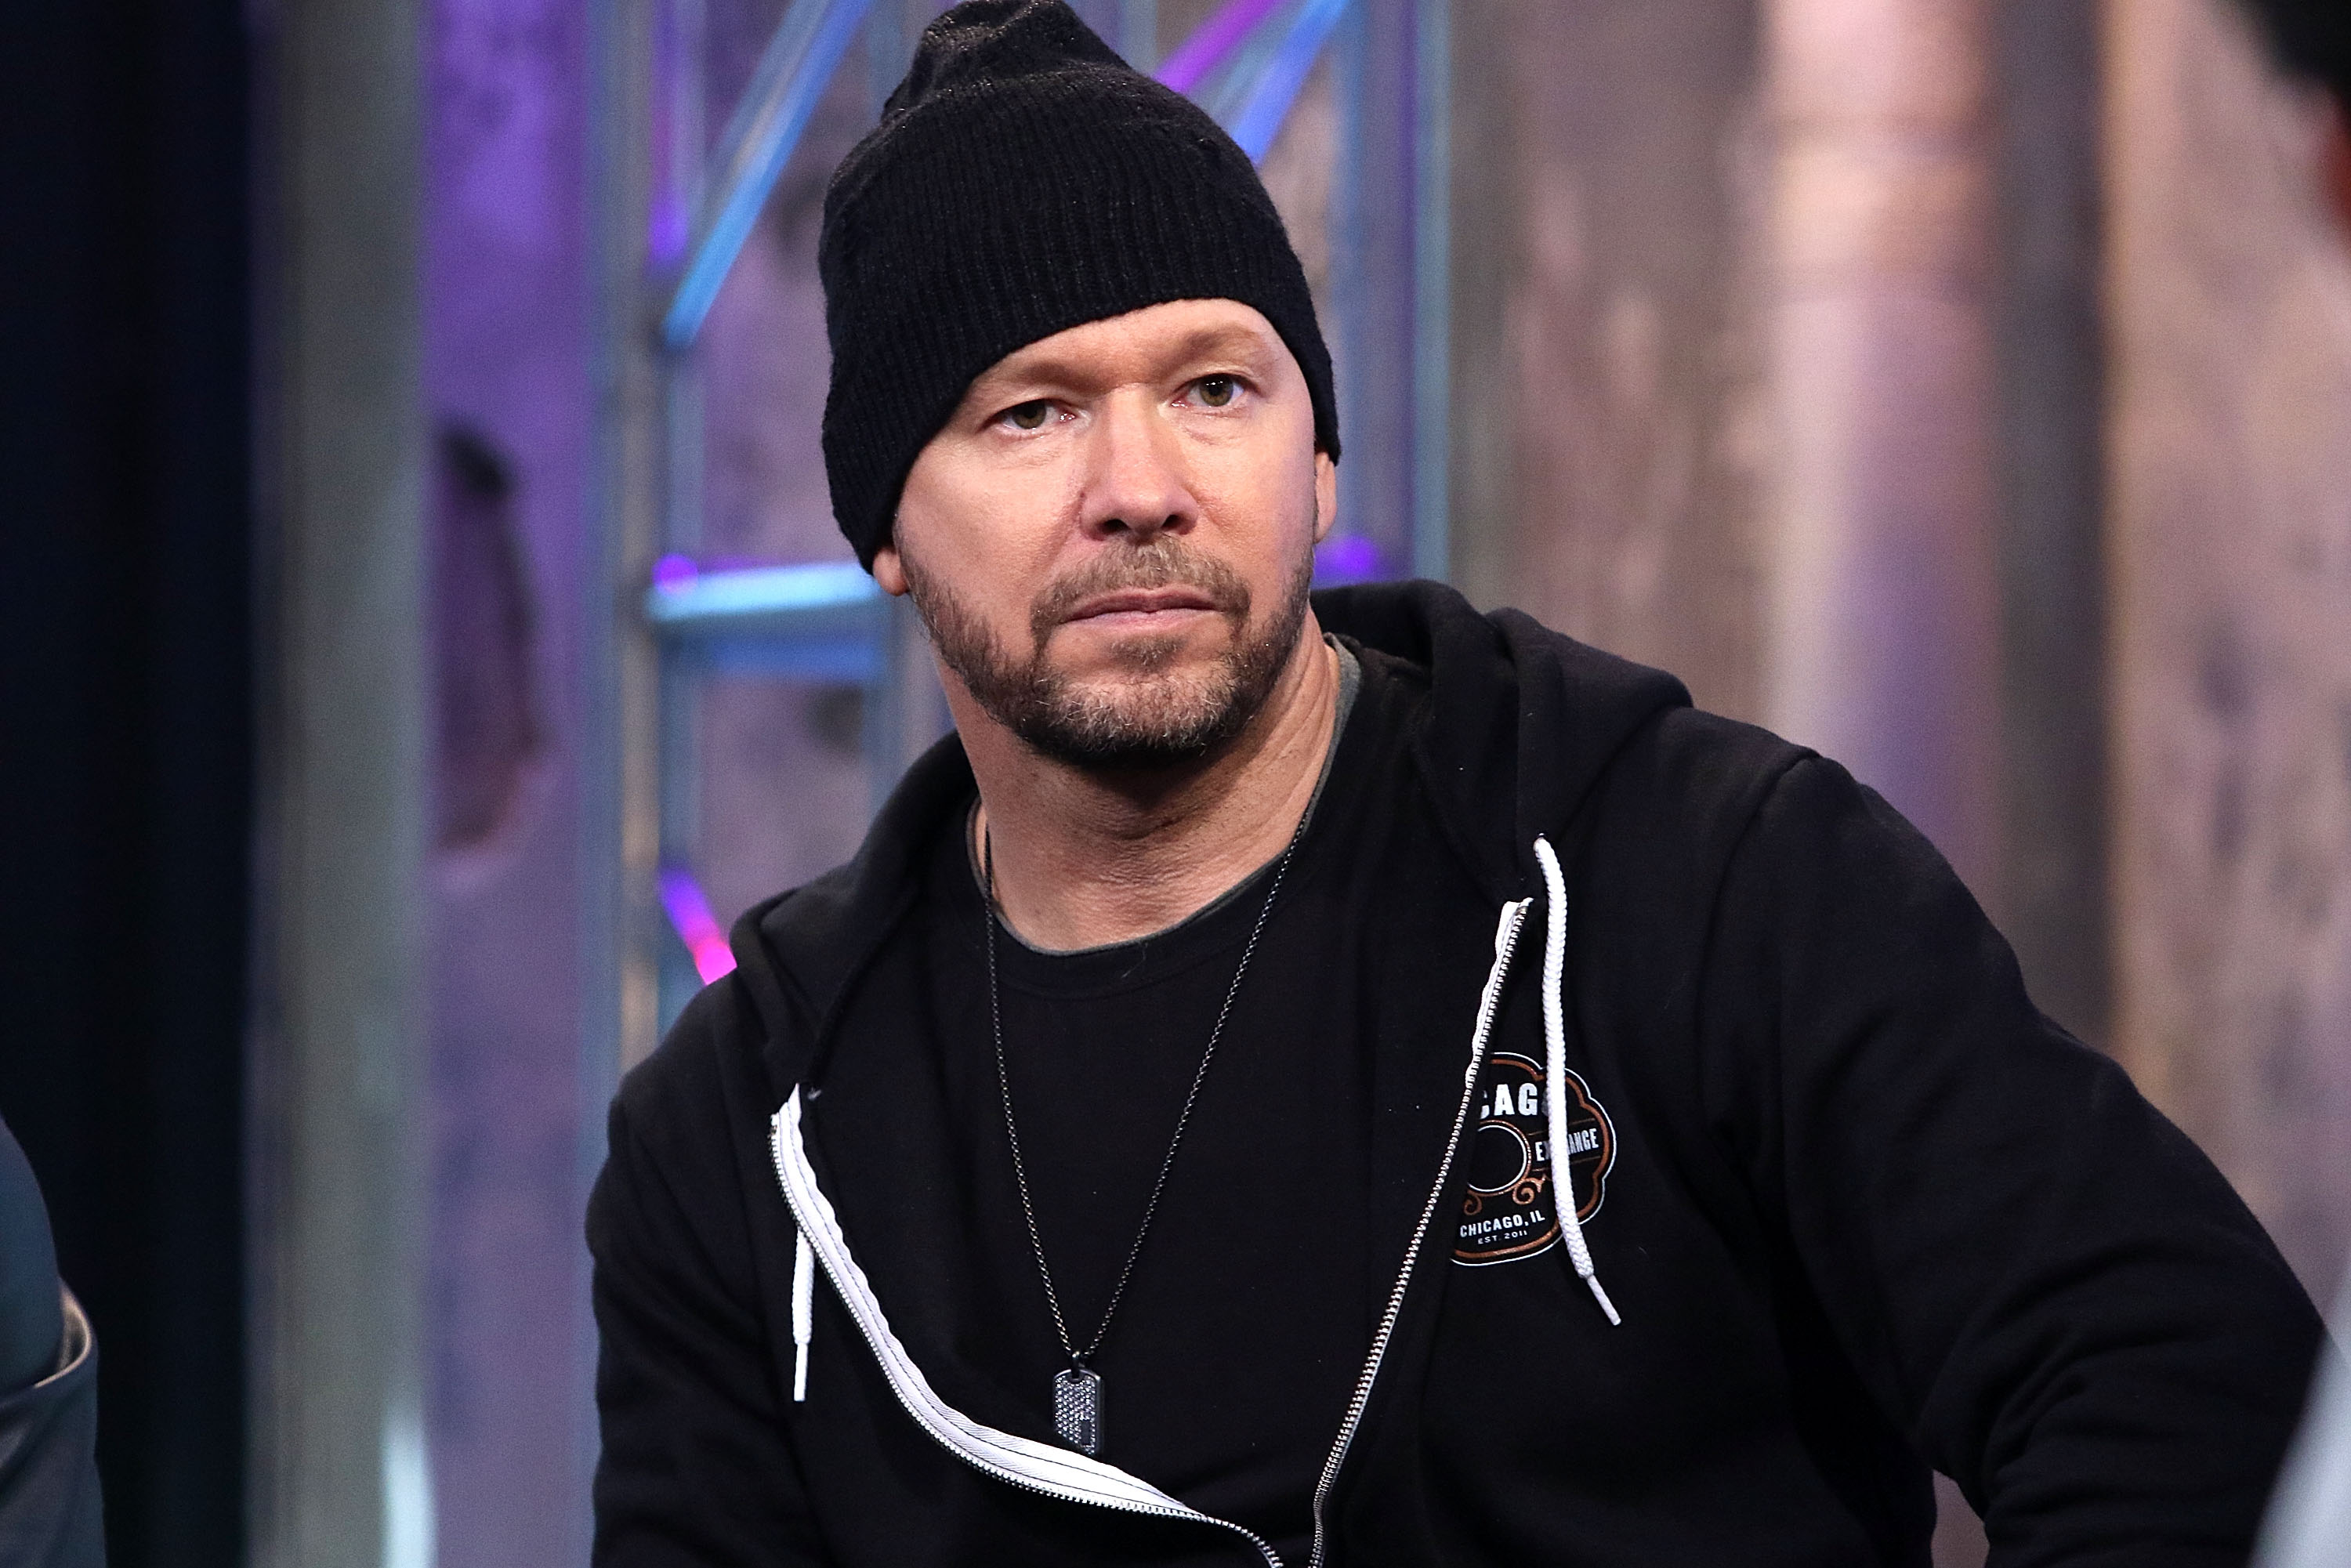 Donnie Wahlberg of New Kids on the Block attends AOL Build Speaker Series to discuss "Rock this Boat: New Kids on the Block" Season 2 at AOL Studios In New York on June 9, 2016, in New York City. | Source: Getty Images.